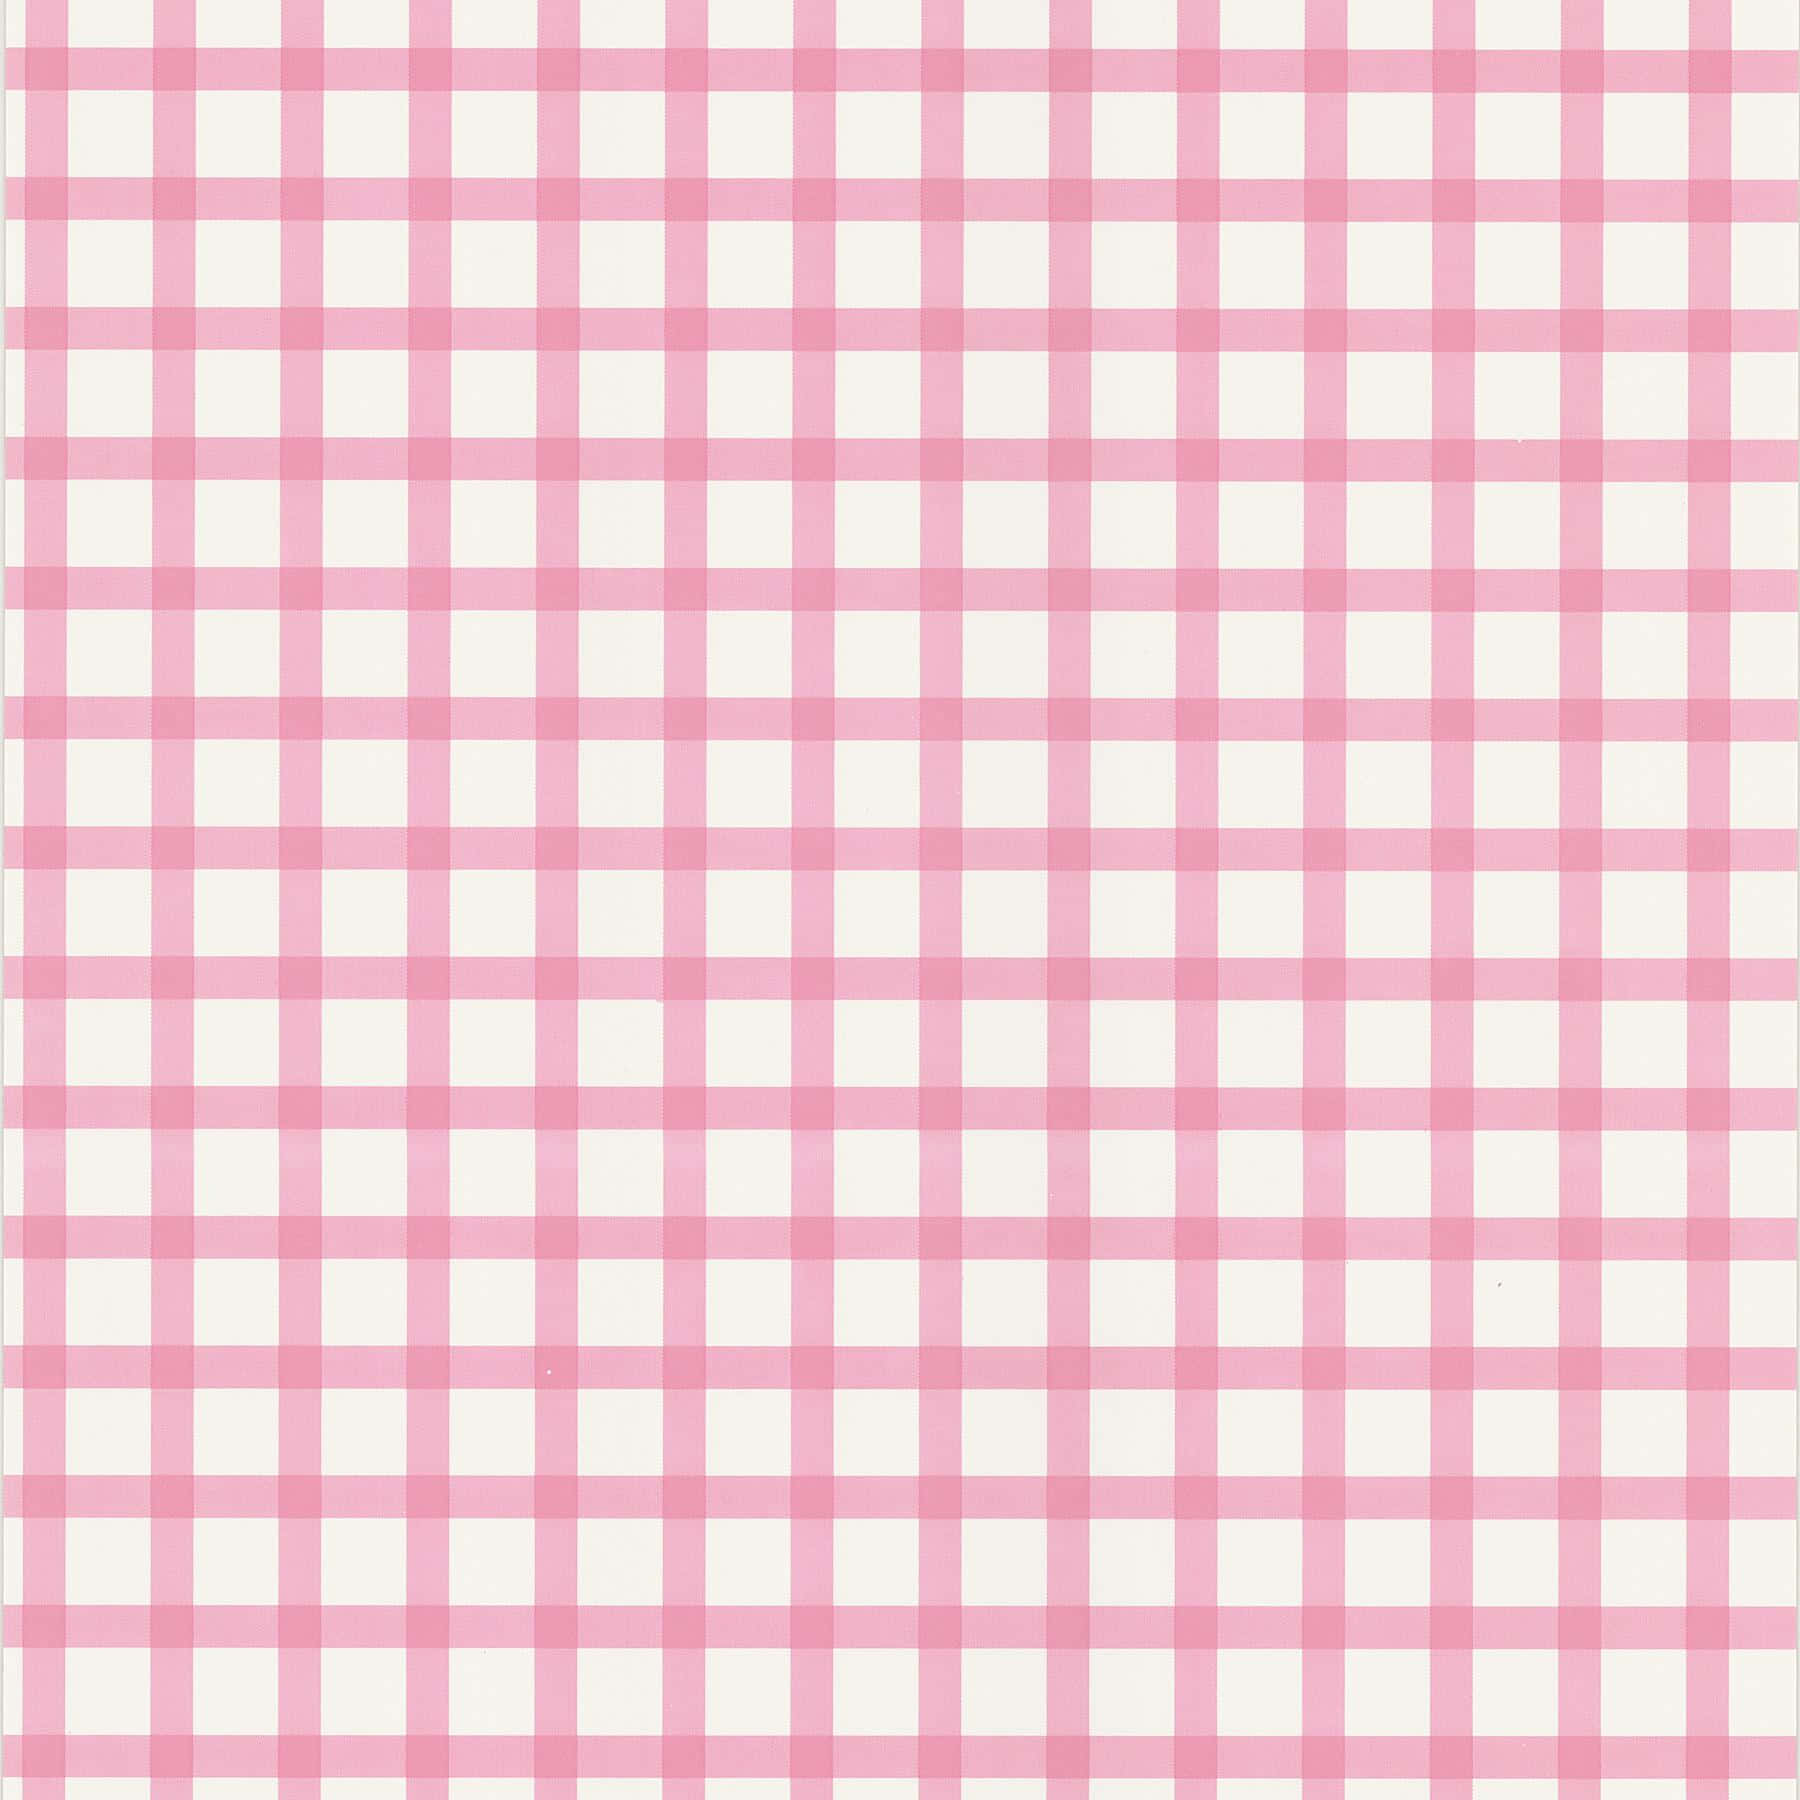 Trendy Pink Checkered background Wallpaper